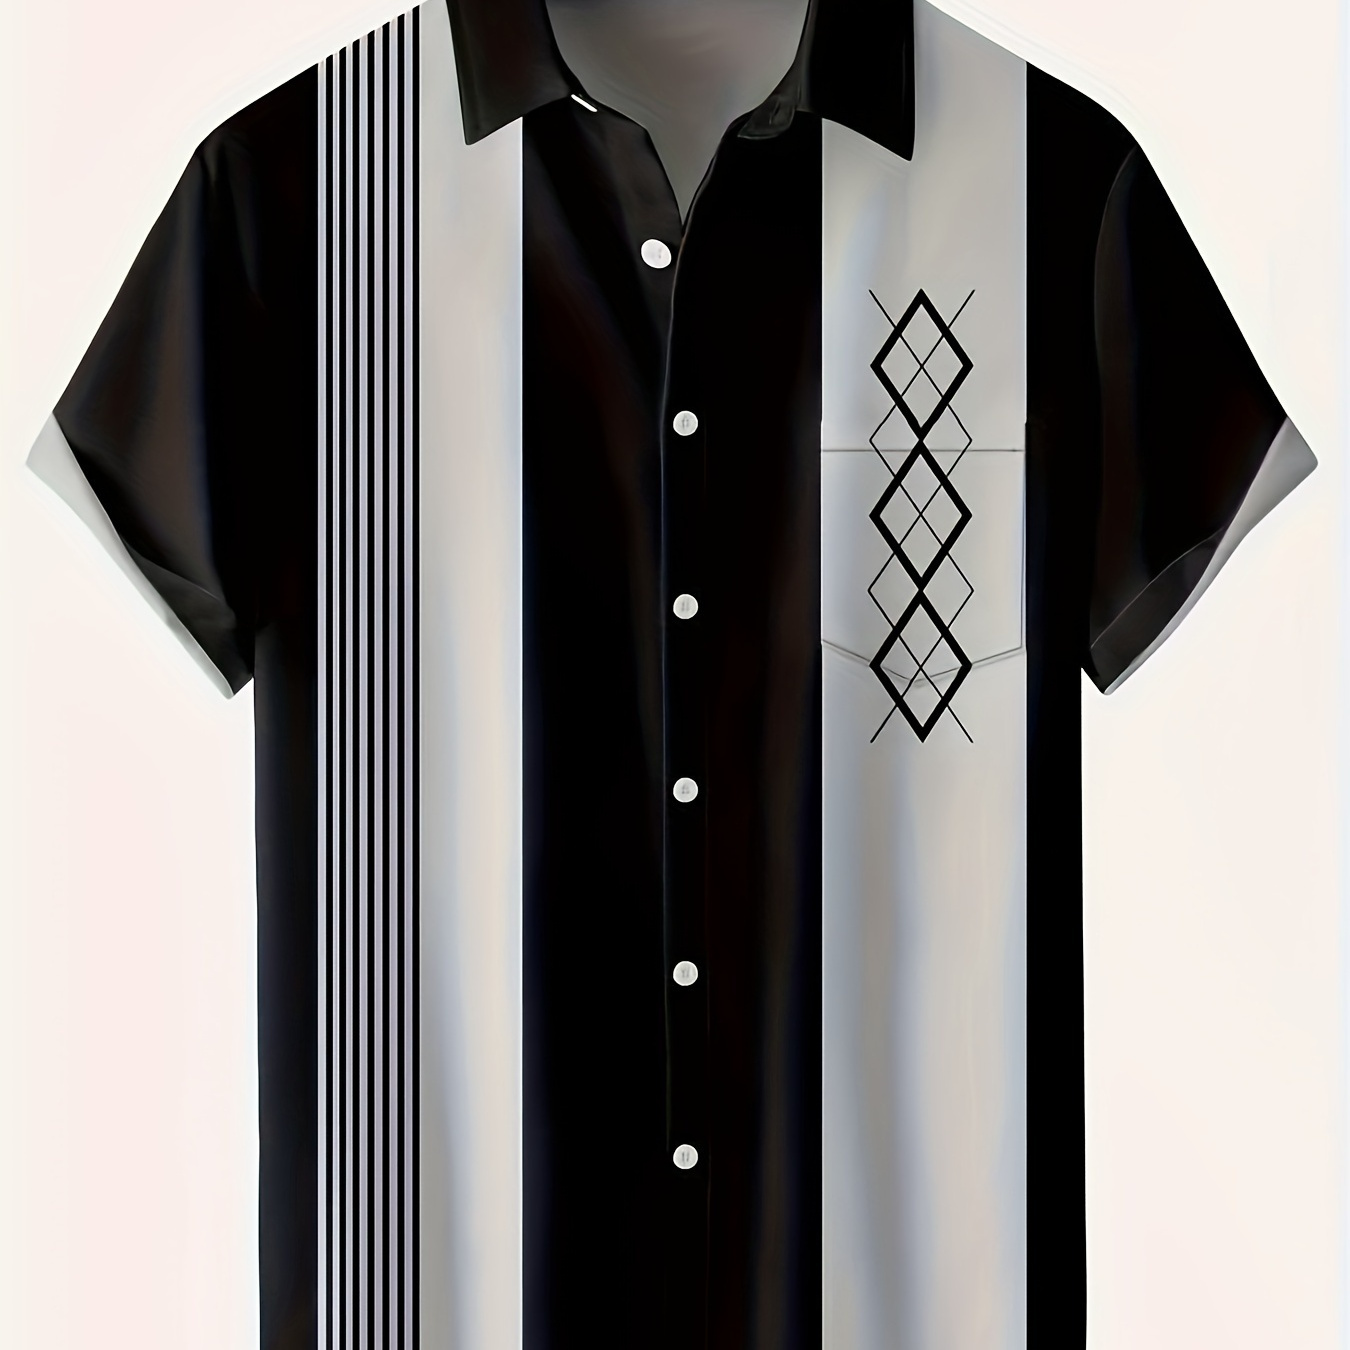 

Plus Size Men's Stripes & Argyle Graphic Print Shirt For Summer, Trendy Casual Short Sleeve Shirt, Bowling Tops